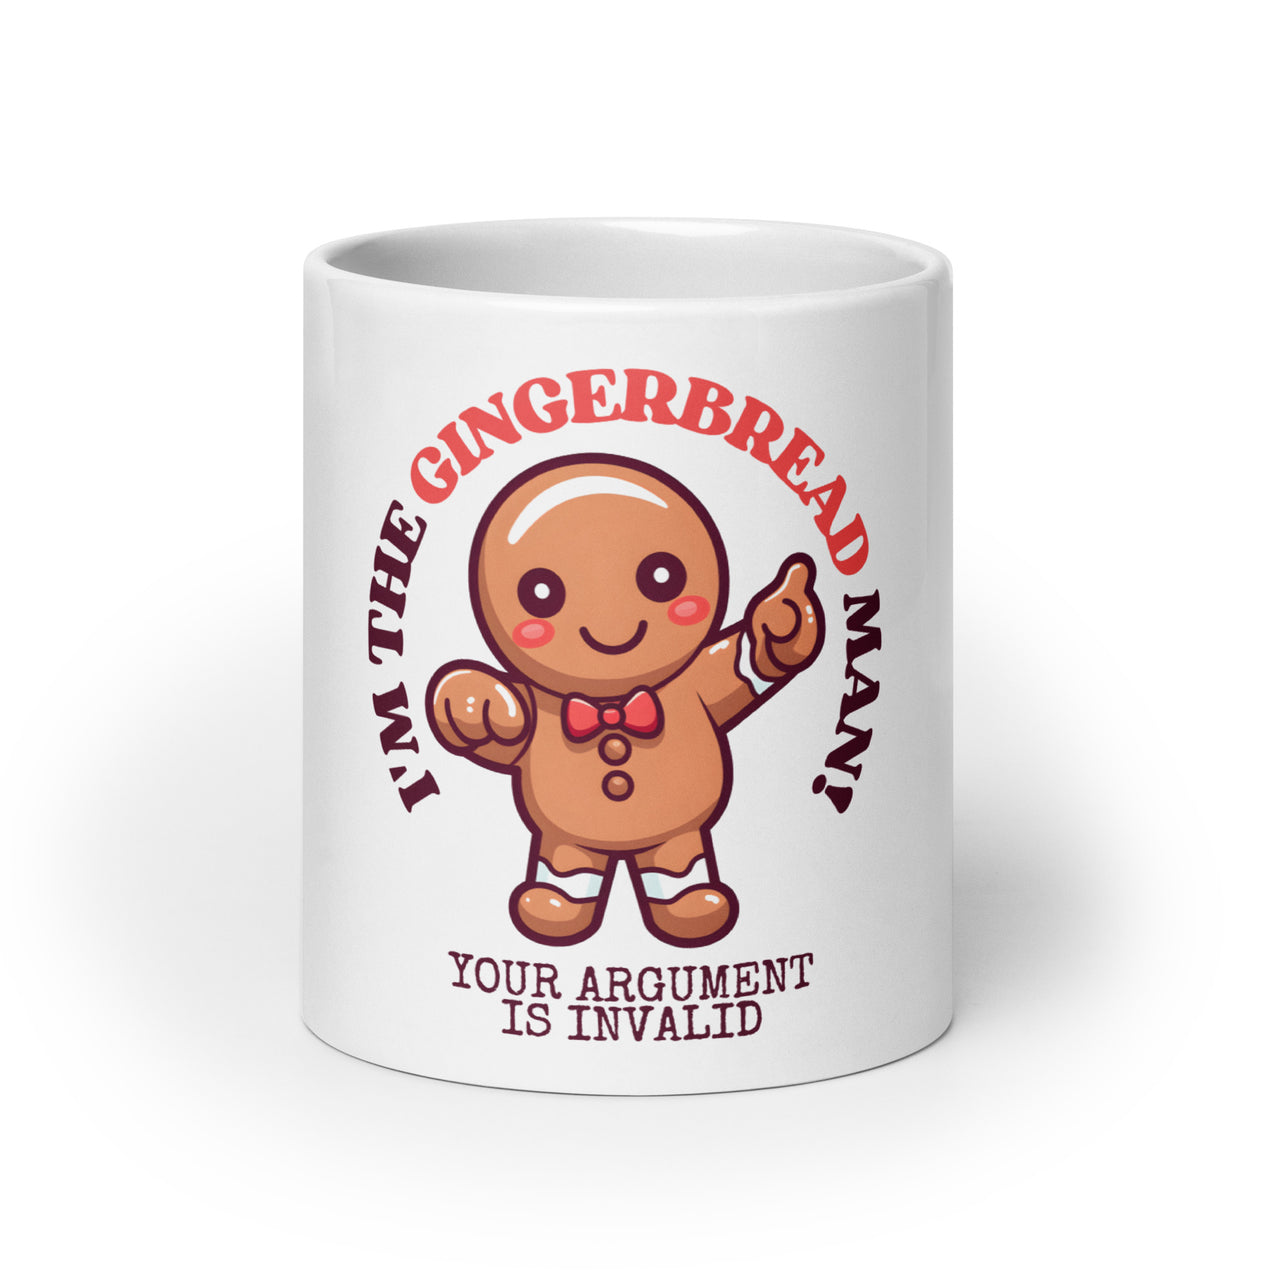 Gingerbread Man Your Argument is Invalid White Mug